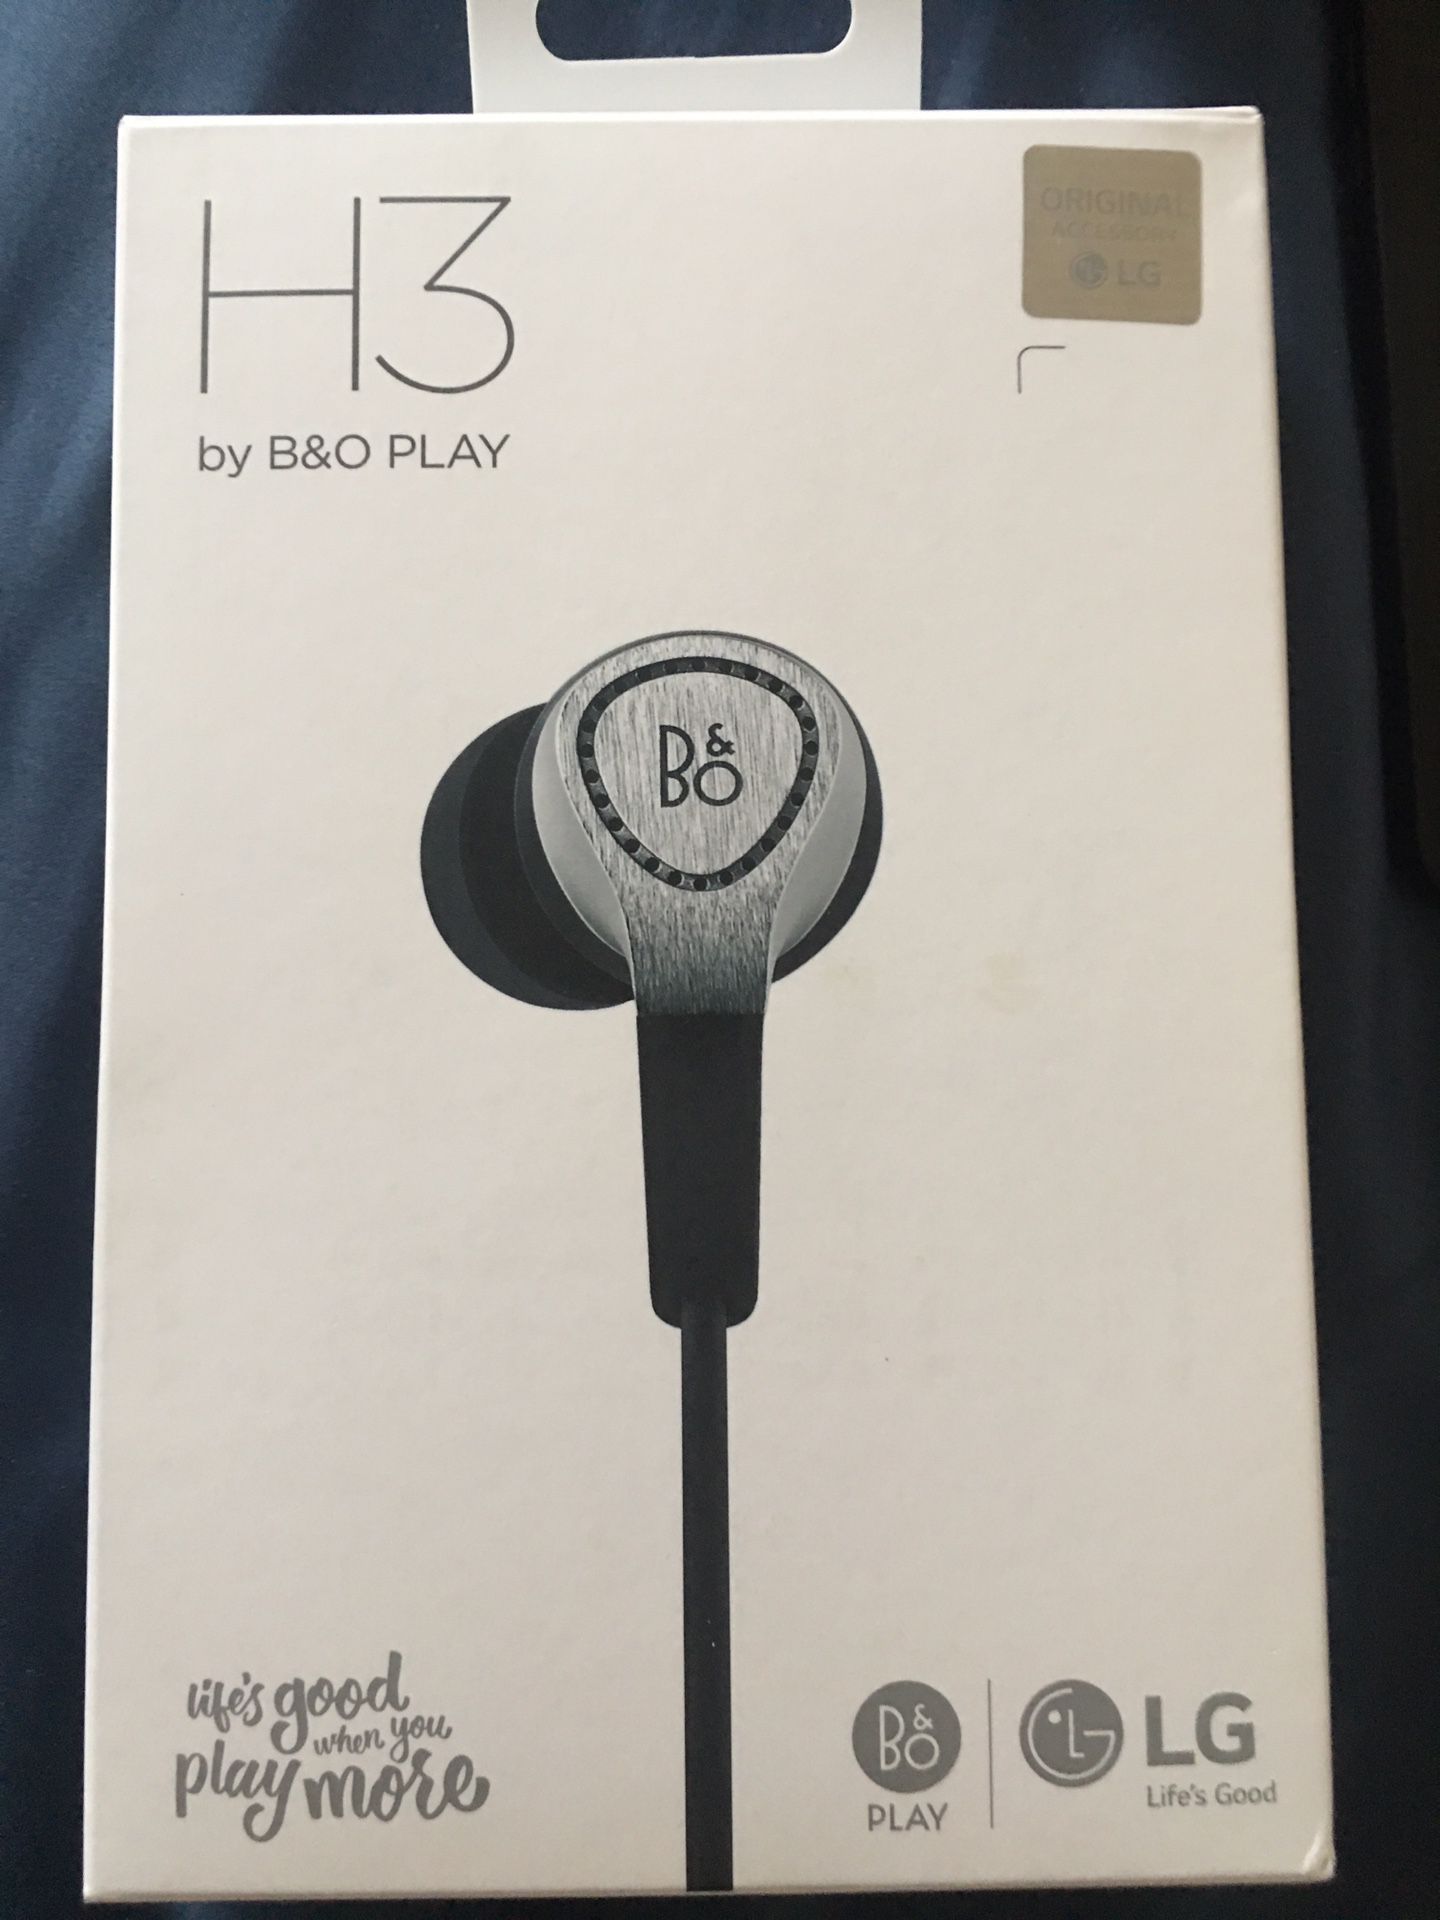 Beoplay H3 earbuds